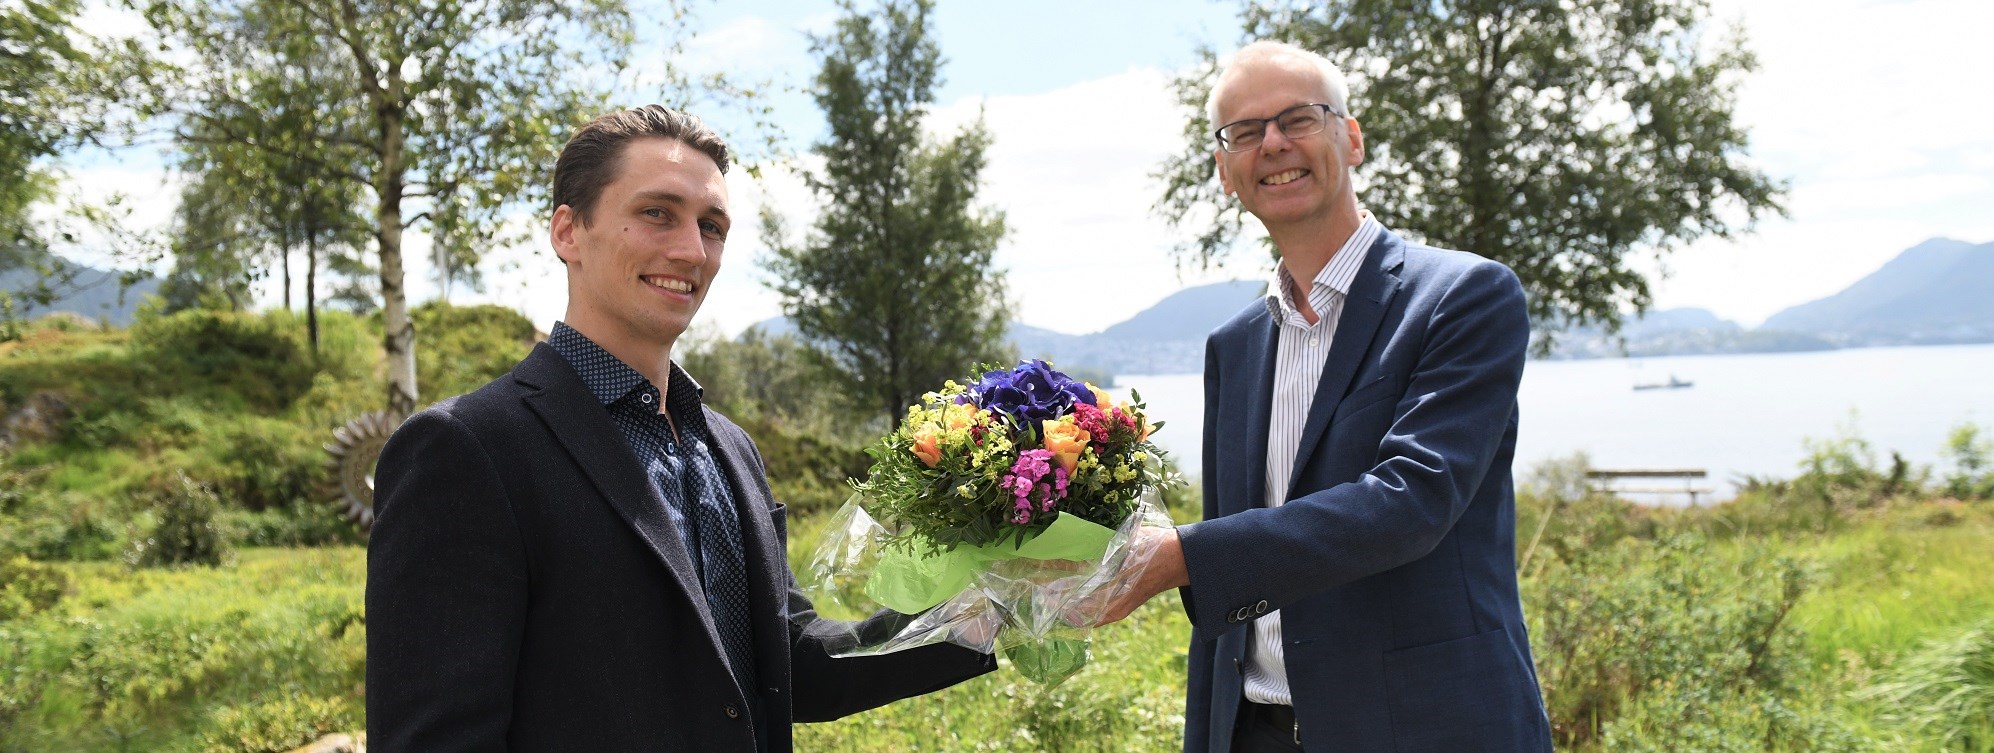 Today, Alexander Willén was promoted to full professor at NHH. He is described as an extremely talented researcher. NHH rector Øystein Thøgersen is congratulating Professor Willén. Photo: Sigrid Folkestad